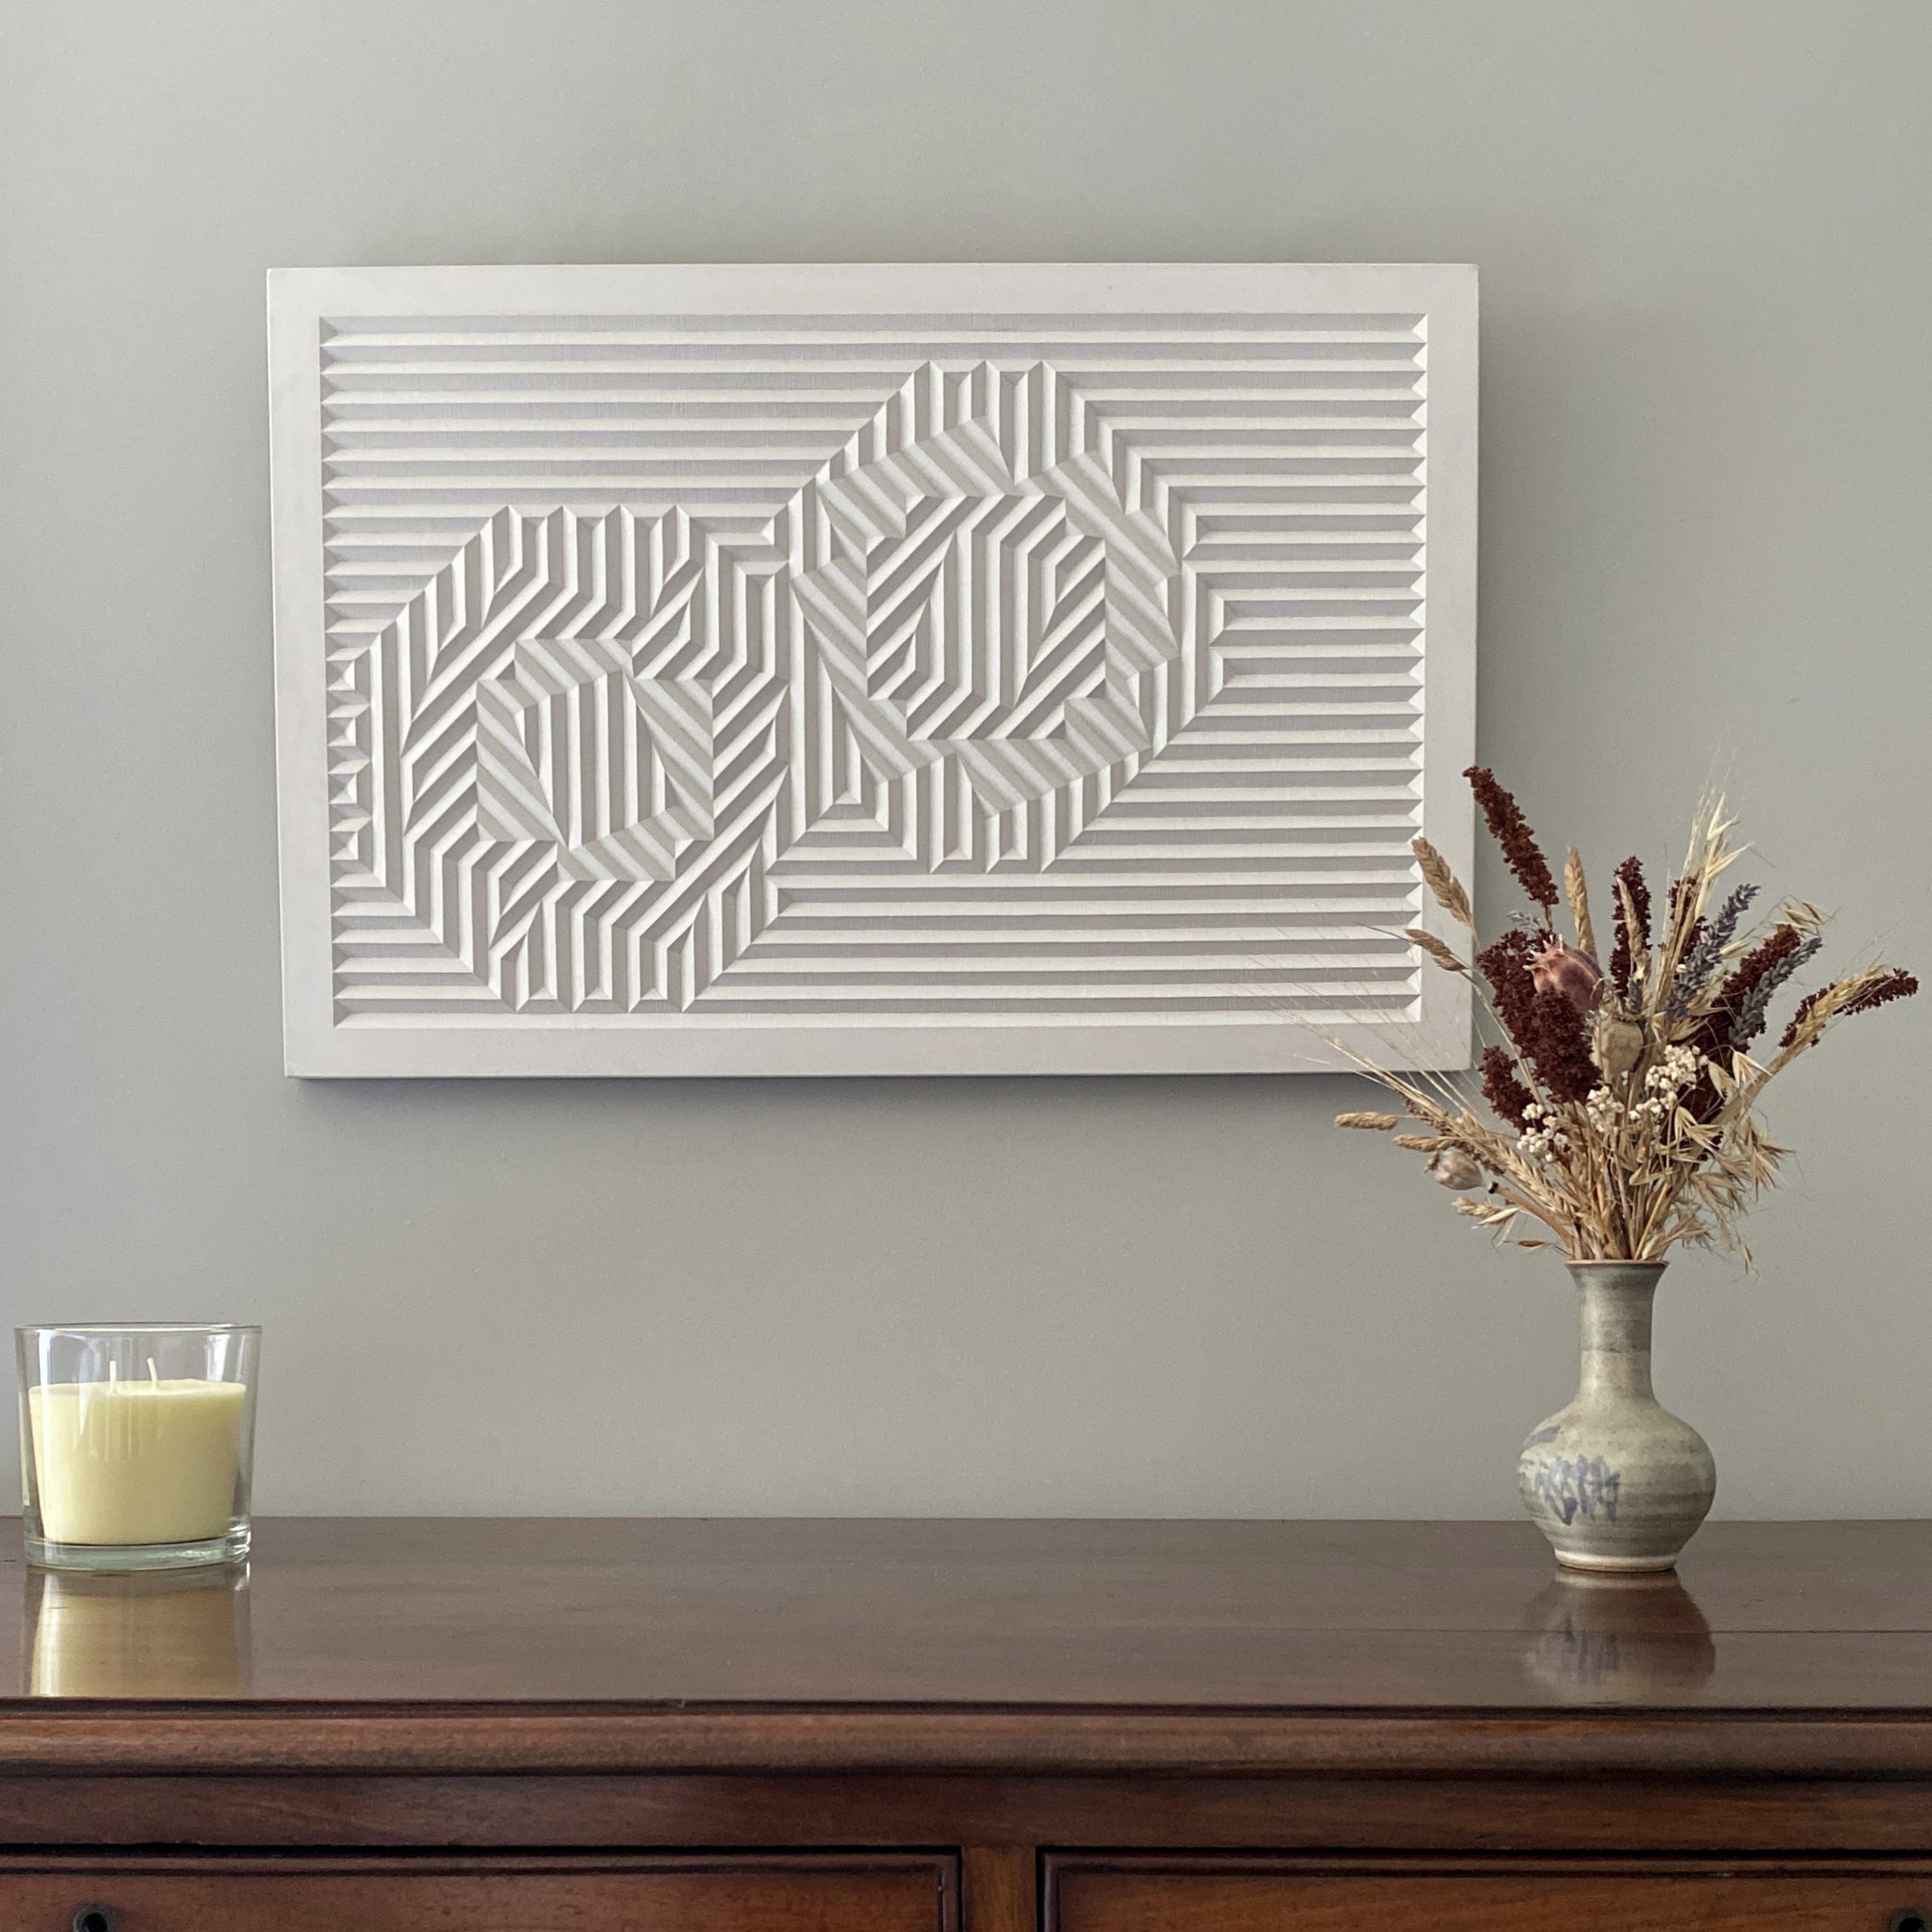 Light coloured cast of a geometric carving hanging on the wall above a chest of drawers